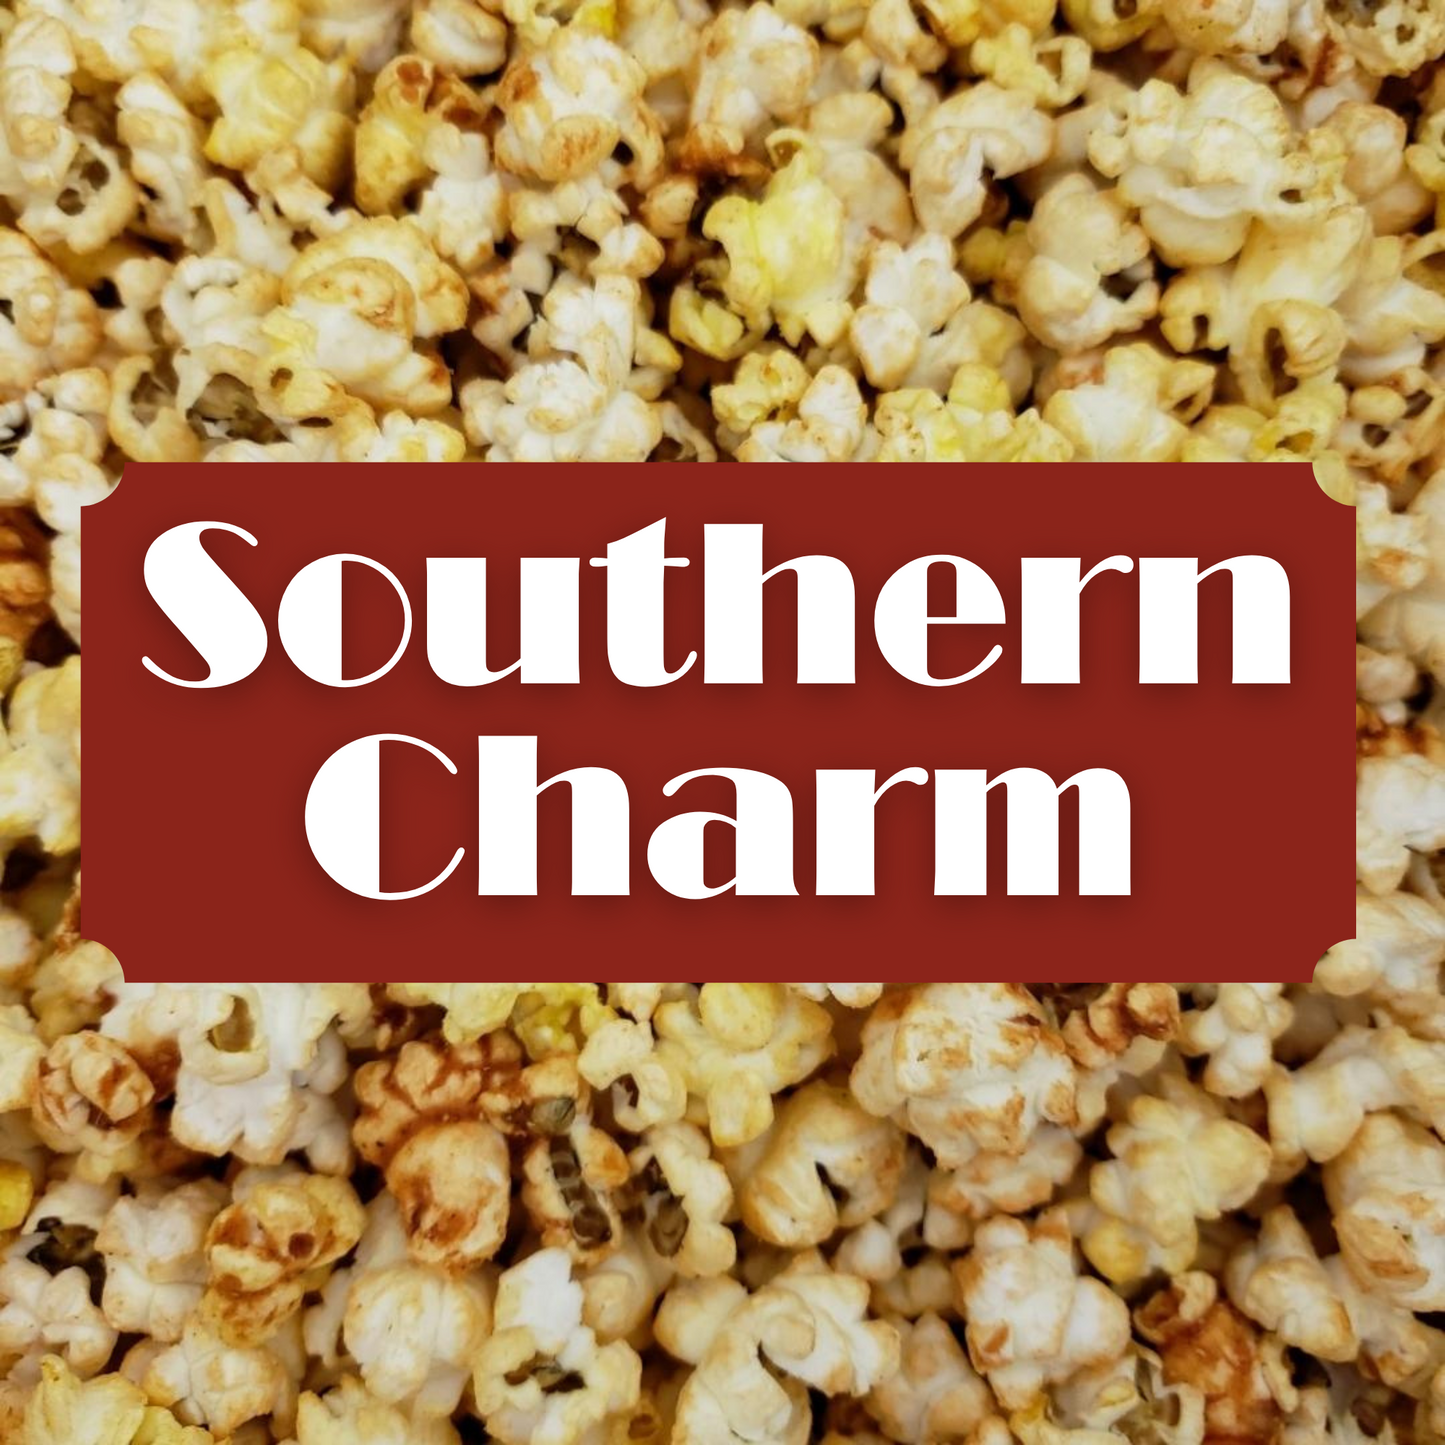 Southern Charm Popcorn Large Bags - Case of 8 ($2.99ea)